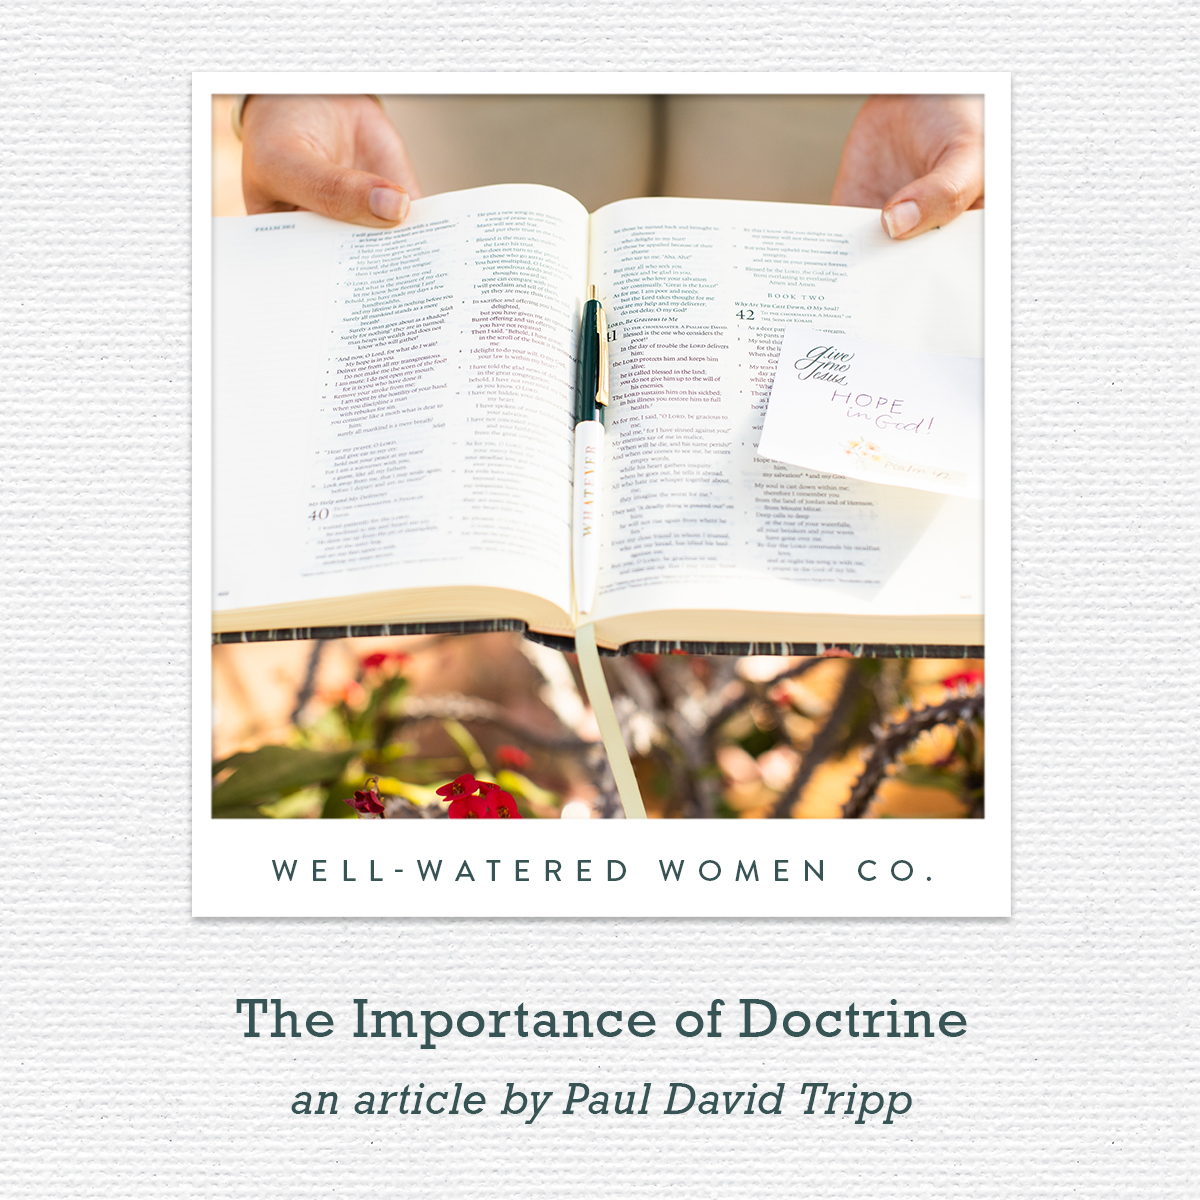 The Importance of Doctrine - an Article from Well-Watered Women